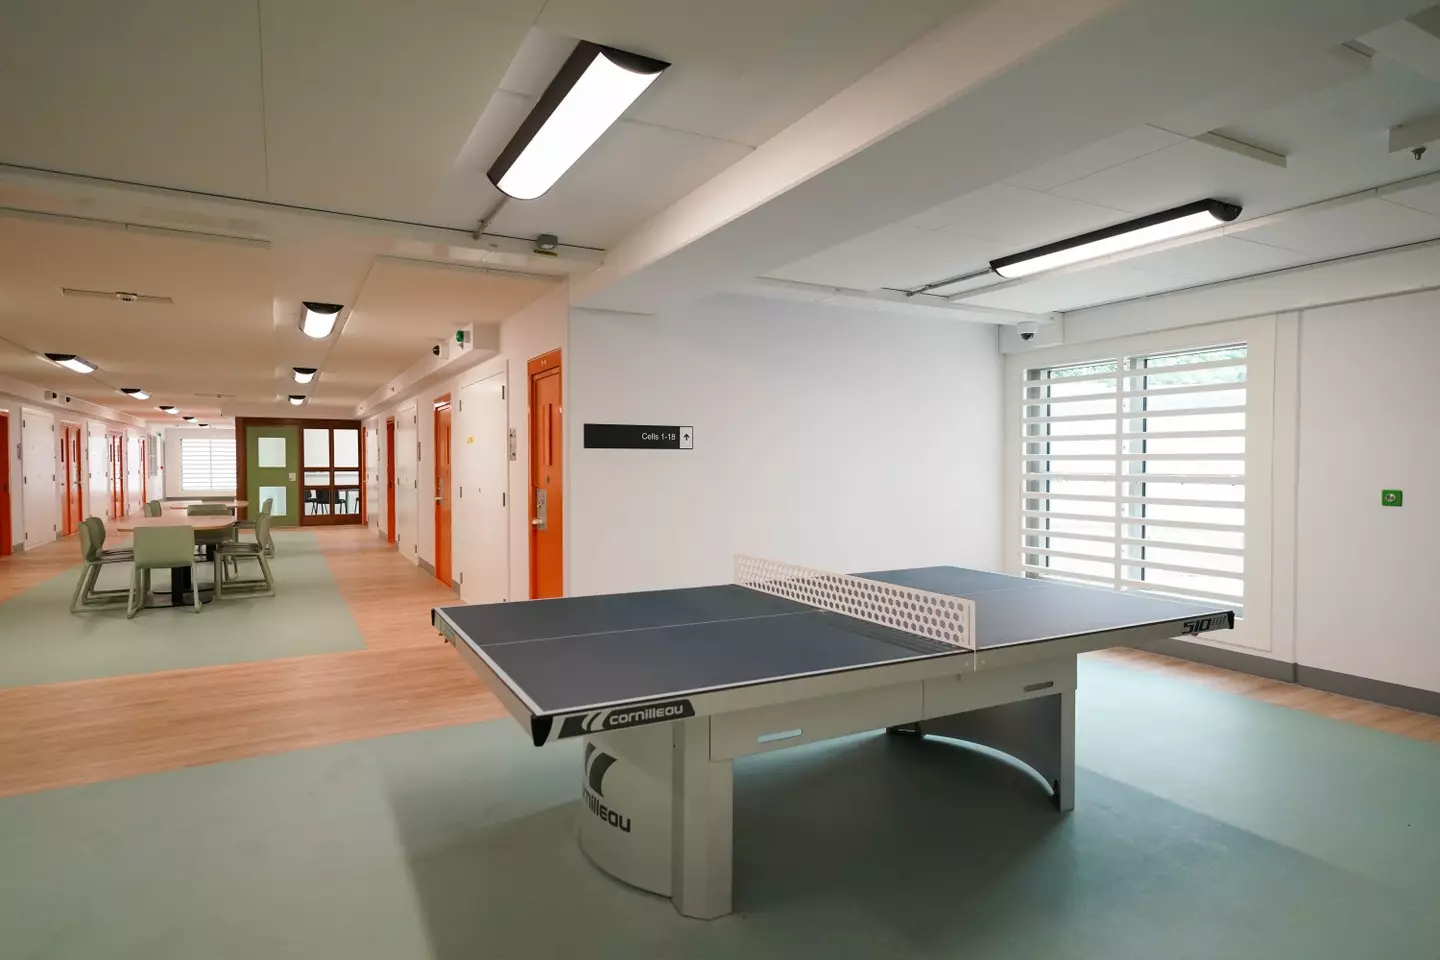 Inmates can make use of the ping pong table.